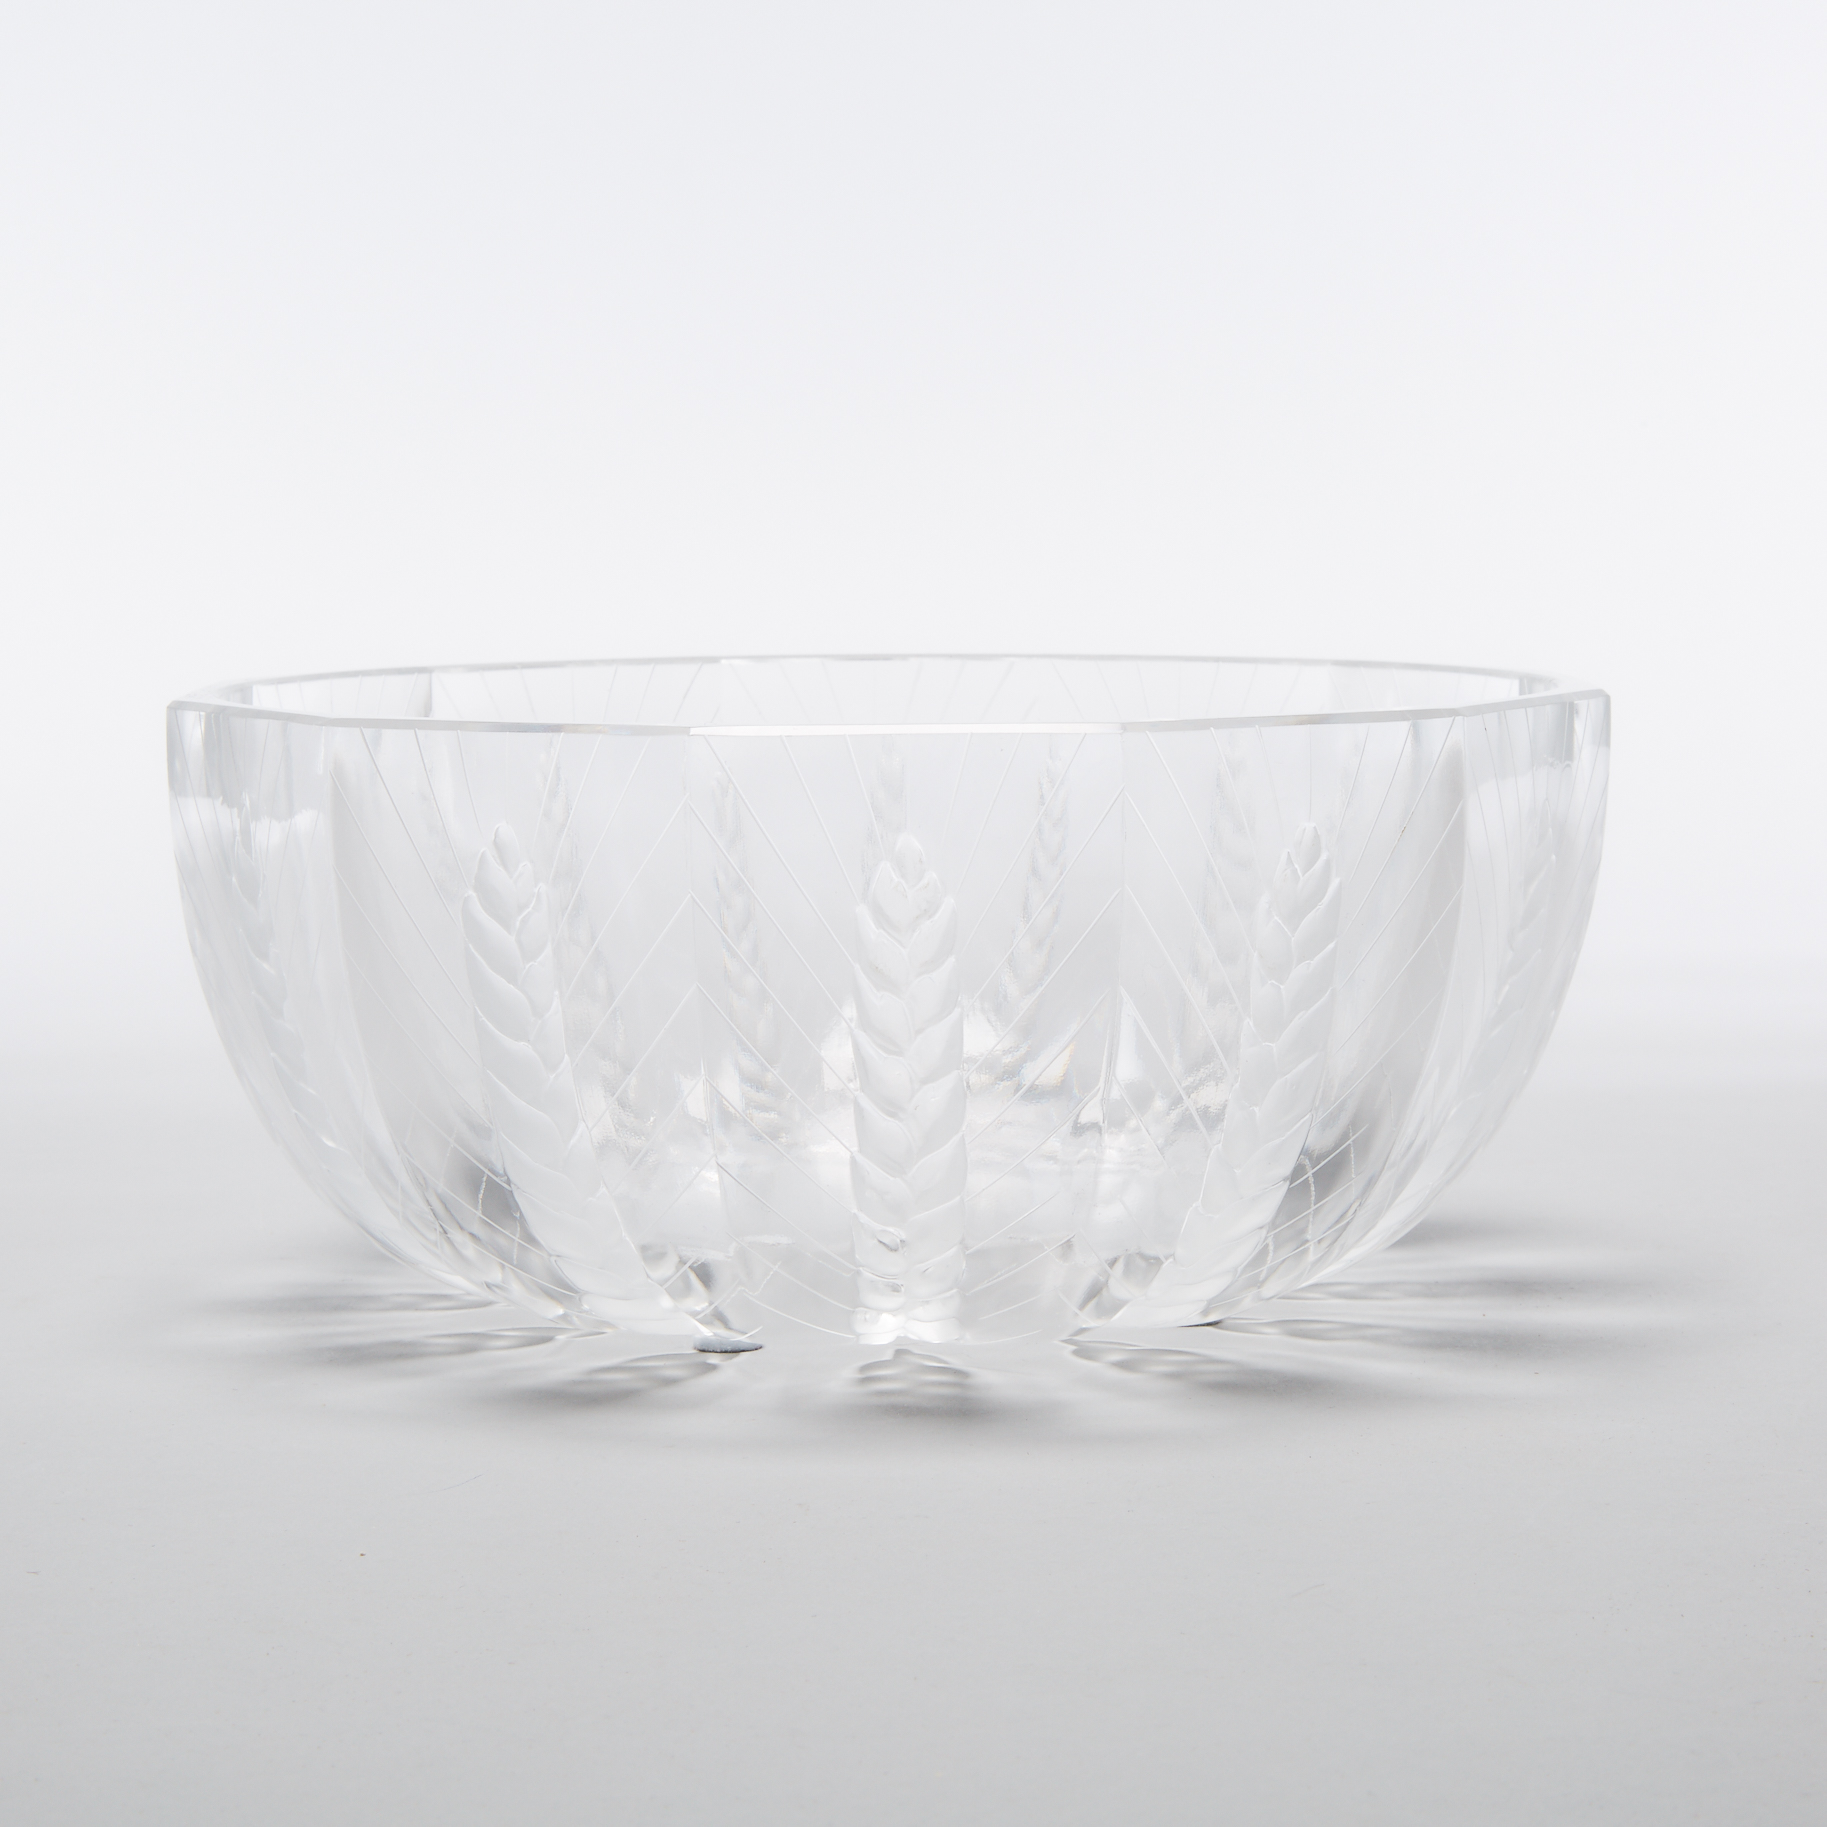 ‘Ceres’, Lalique Moulded and partly Frosted Glass Bowl, post-1945